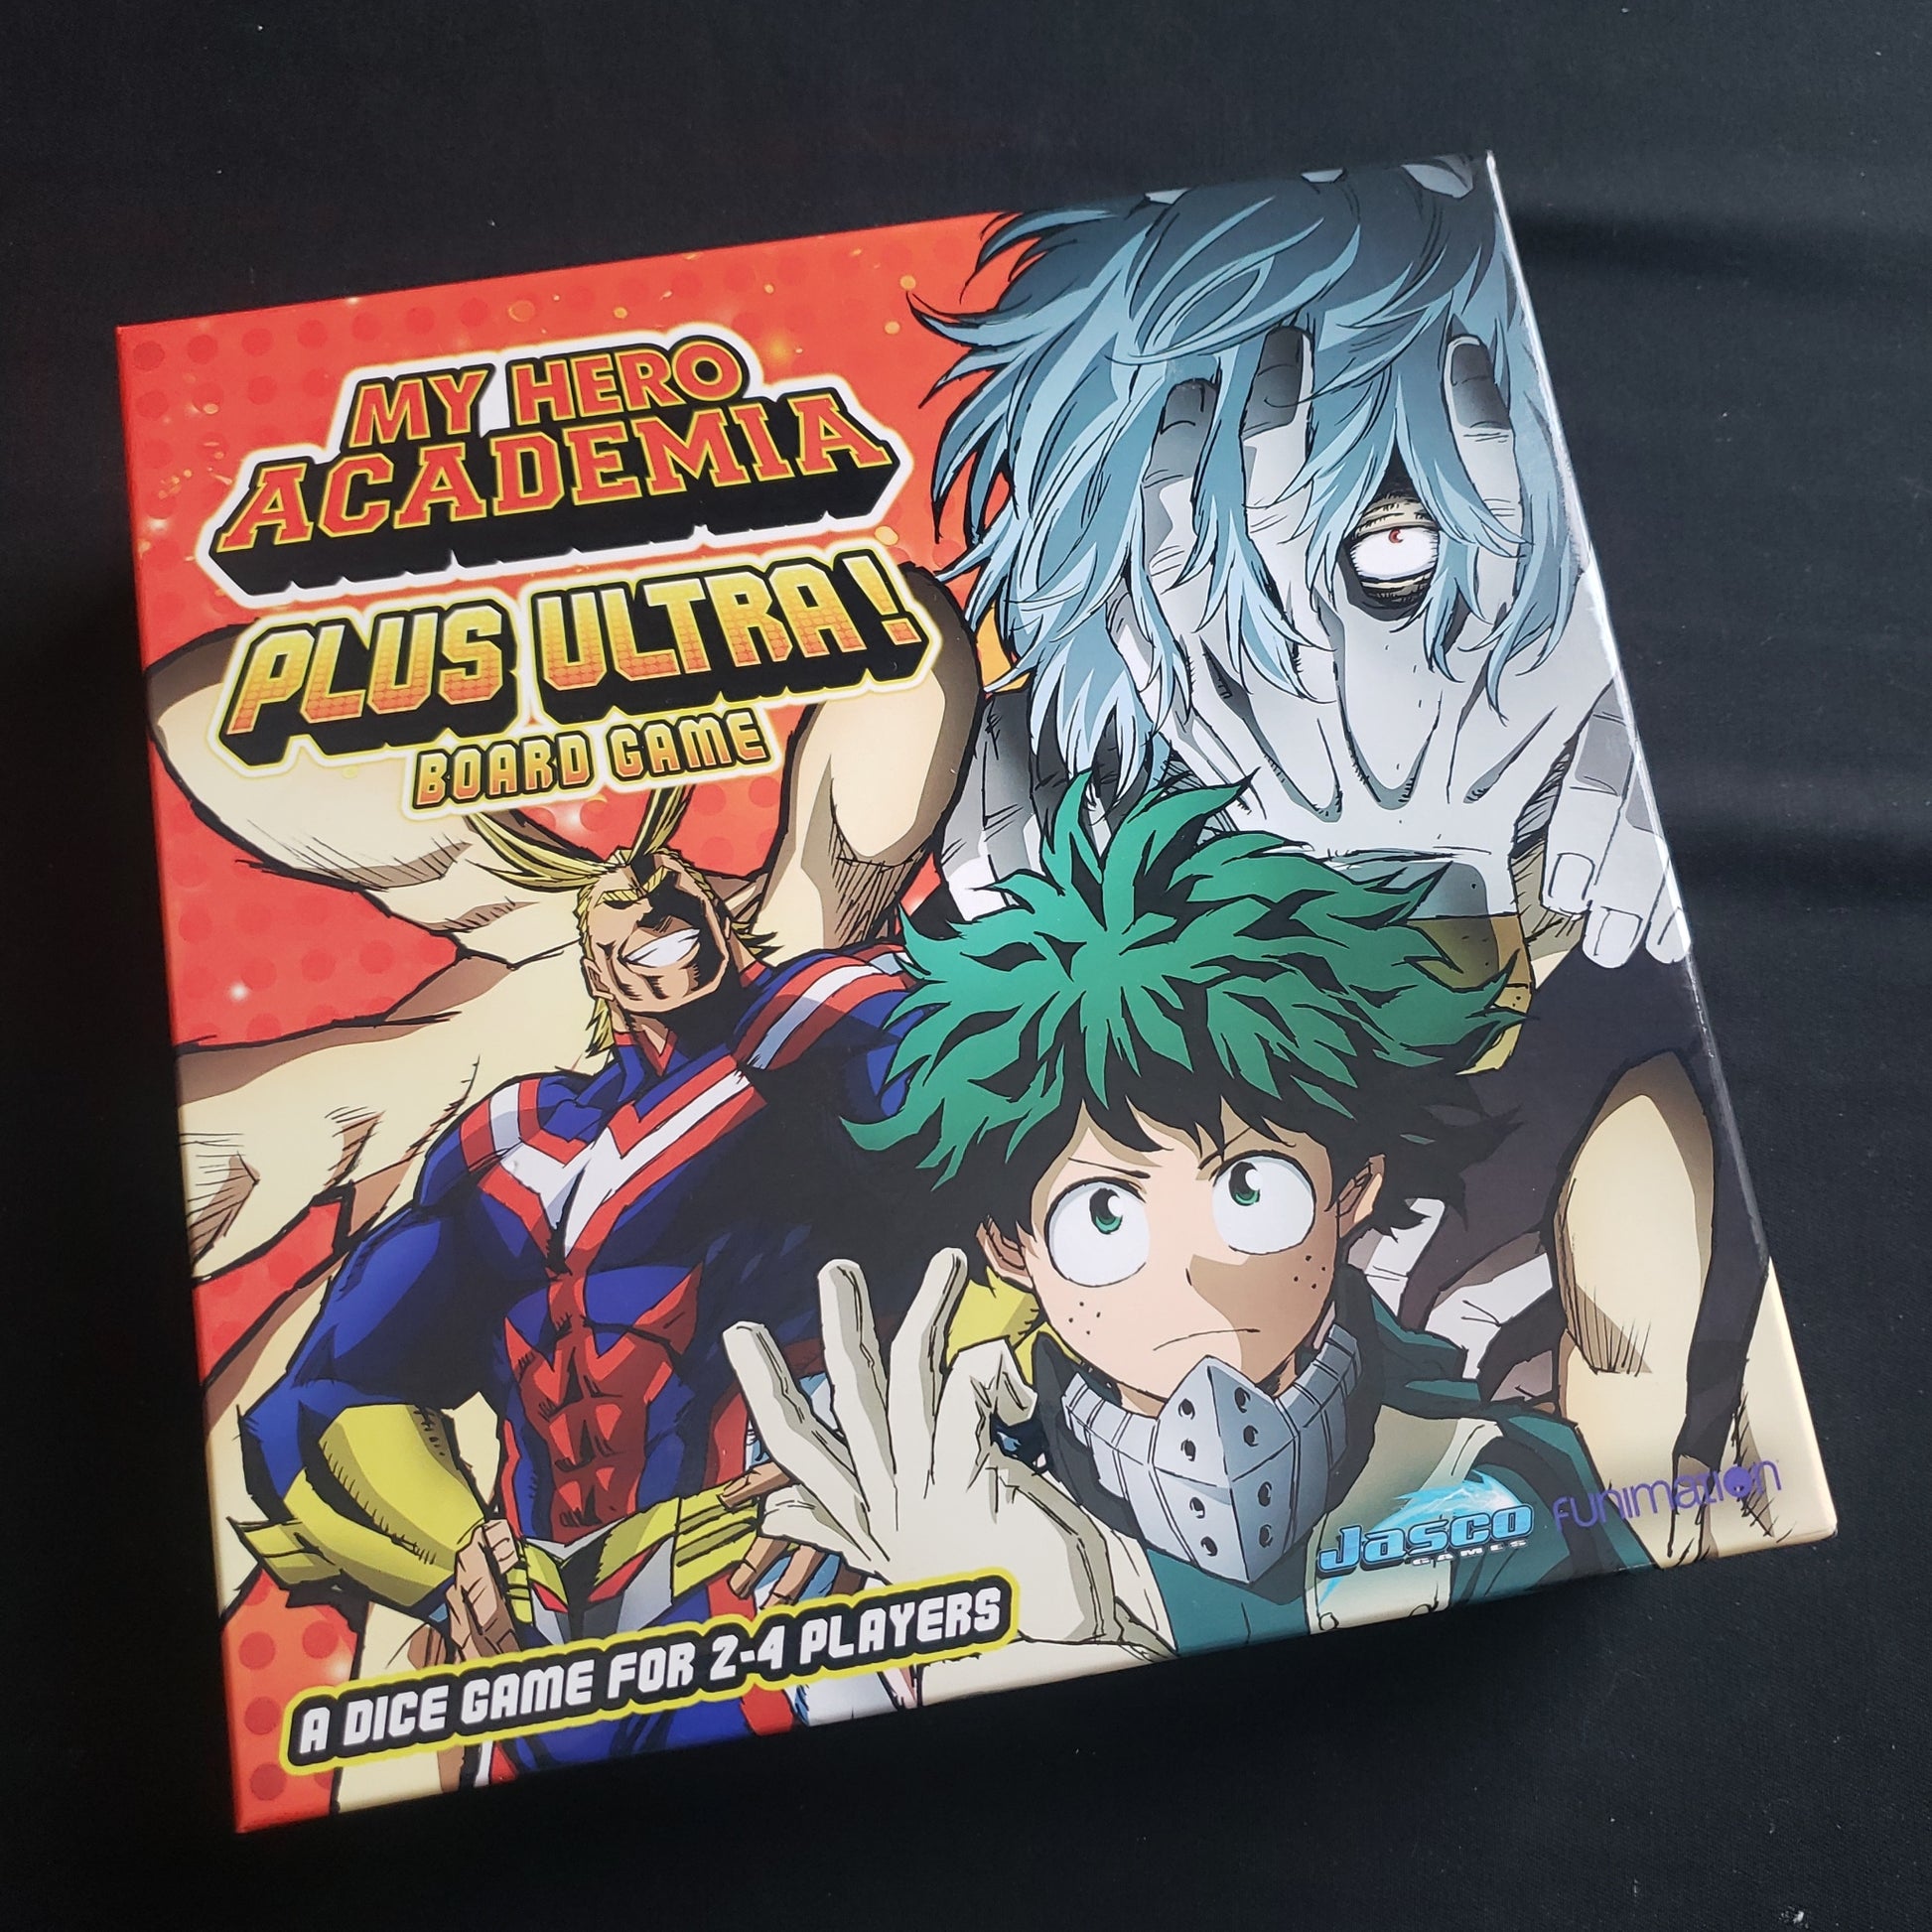 Image shows the front cover of the box of the My Hero Academia: Plus Ultra! board game